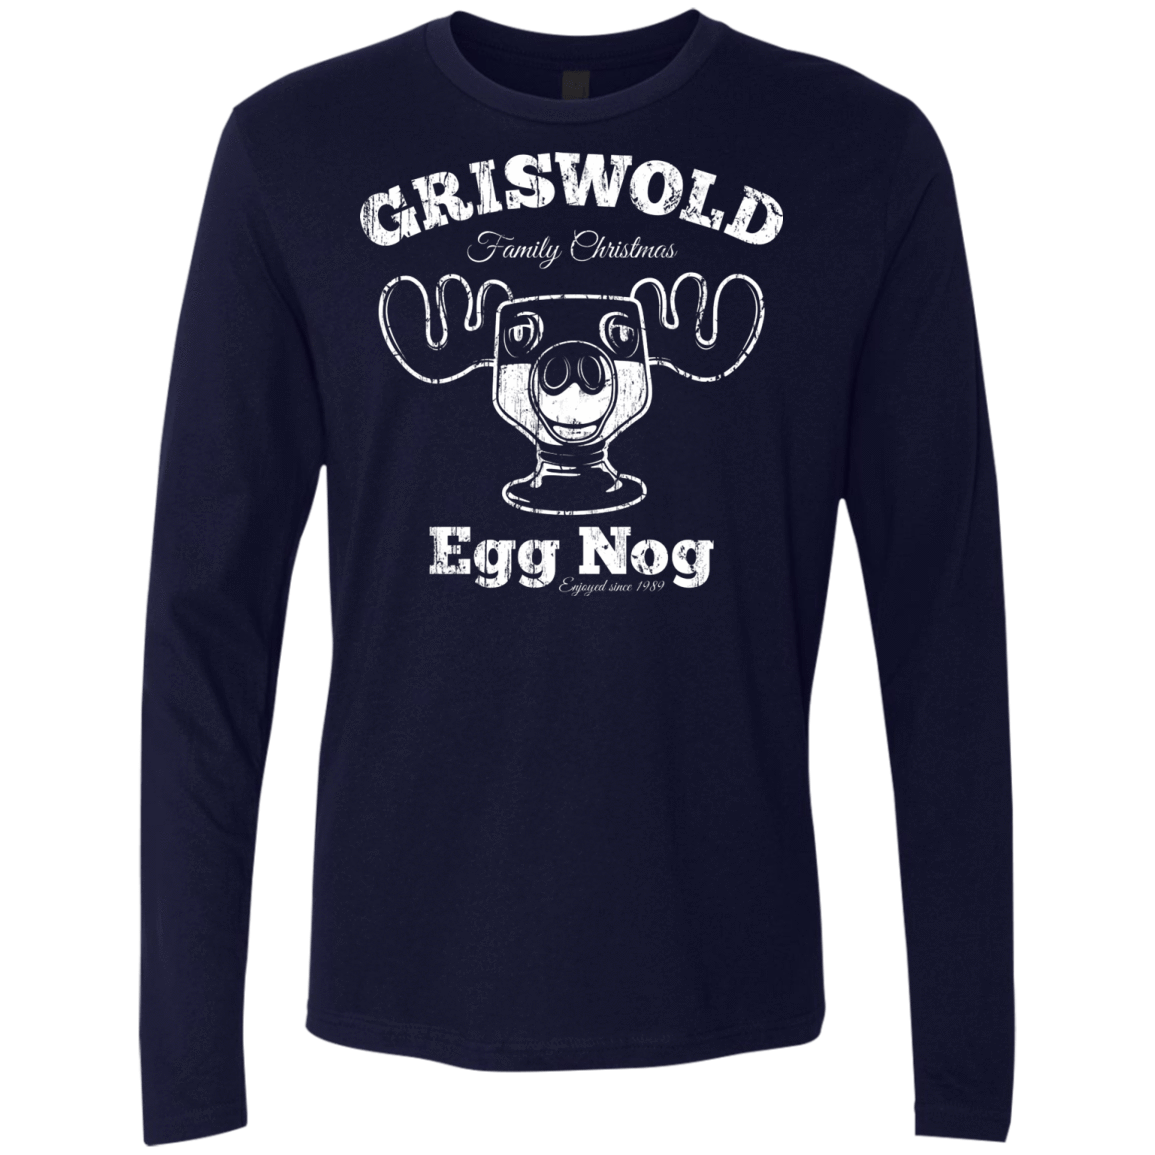 T-Shirts Midnight Navy / Small Griswold Christmas Egg Nog Men's Premium Long Sleeve